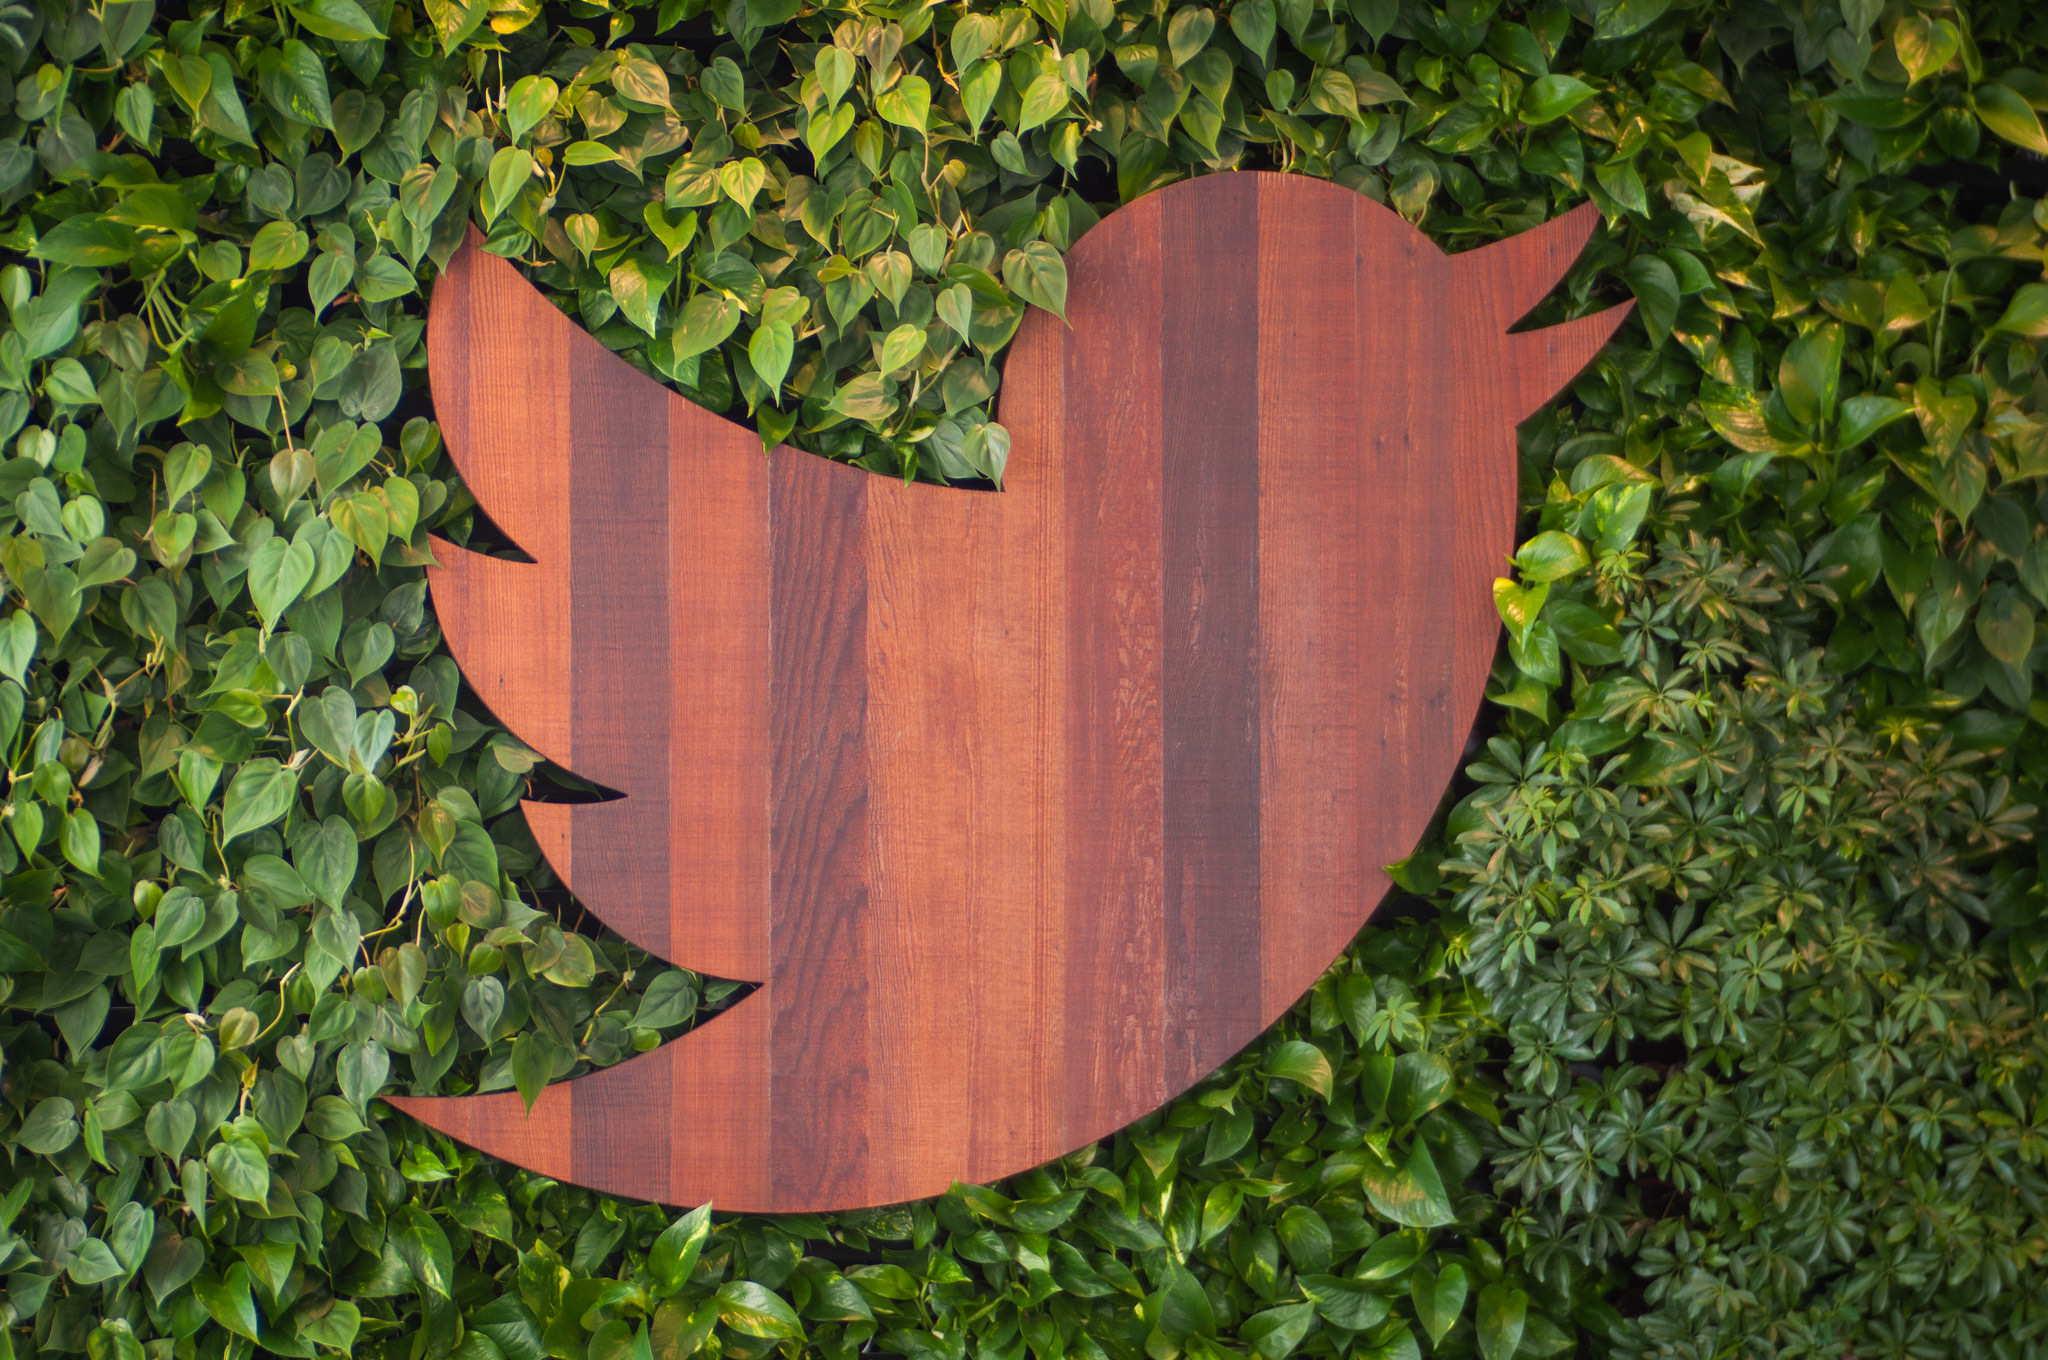 Twitter Losing More Employees Amidst Challenges